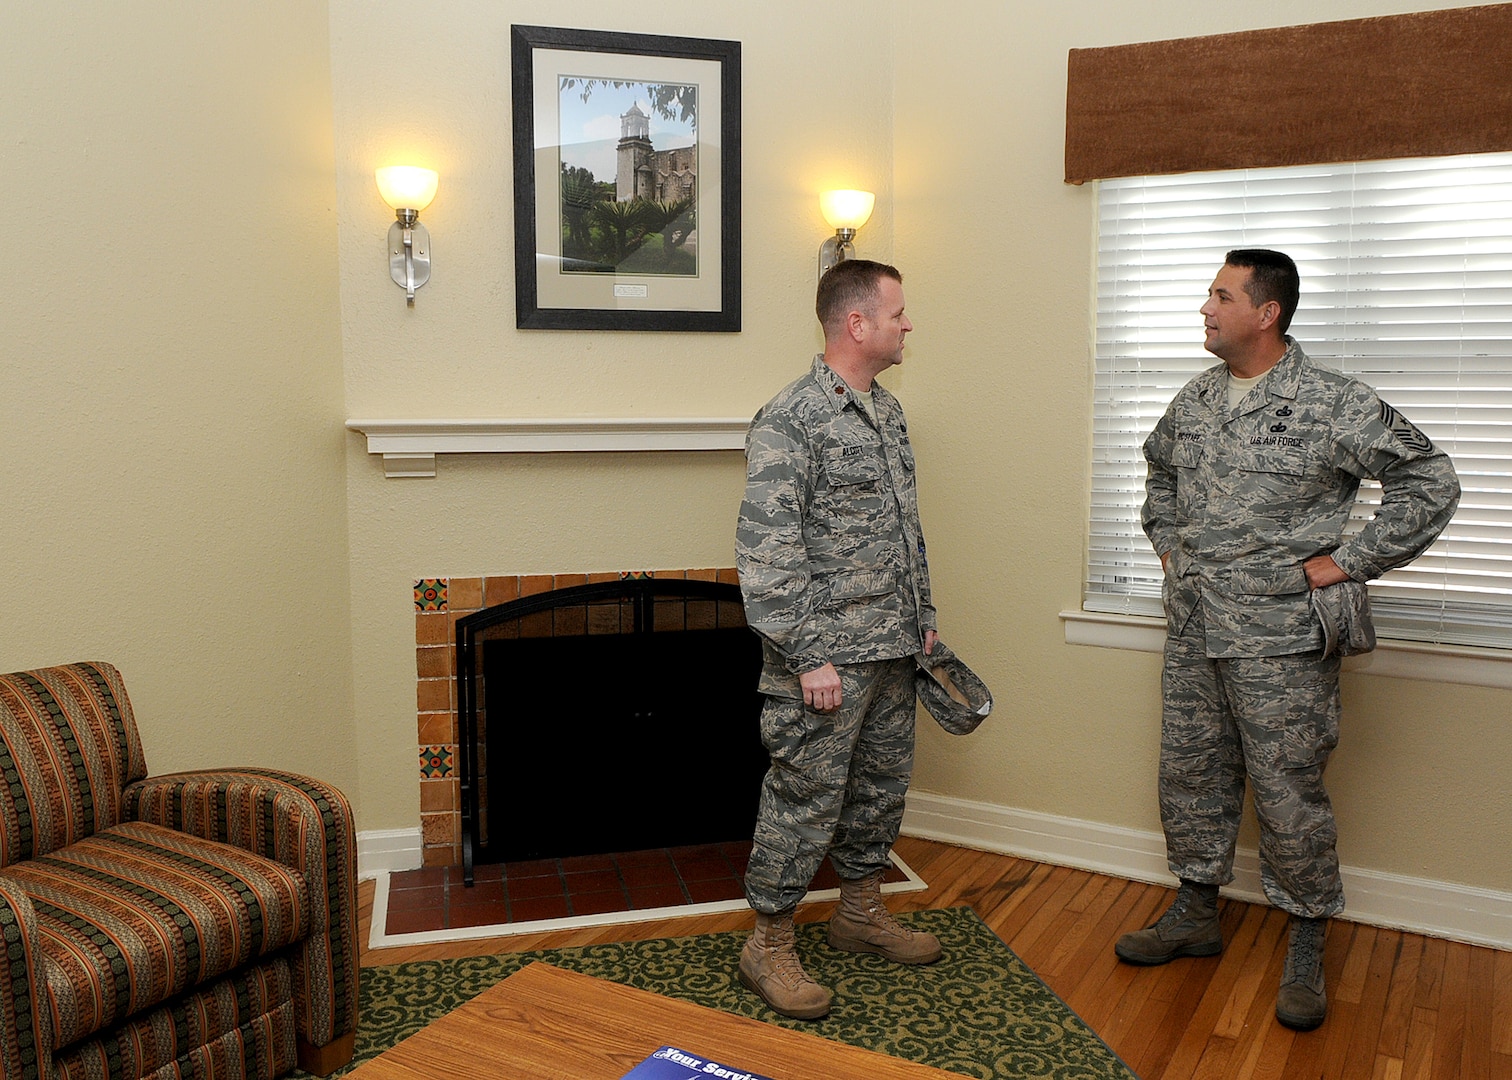 Maj. Todd Alcott, left, Air Force loding chief, and Chief Master Sgt. Max Grindstaff, 12th Flying Training Wing command chief, visit a newly renovated Temporary Lodging Facility, following a Nov. 3 ribbon cutting ceremony at Randolph Air Force Base. (U.S. Air Force photo by David Terry)